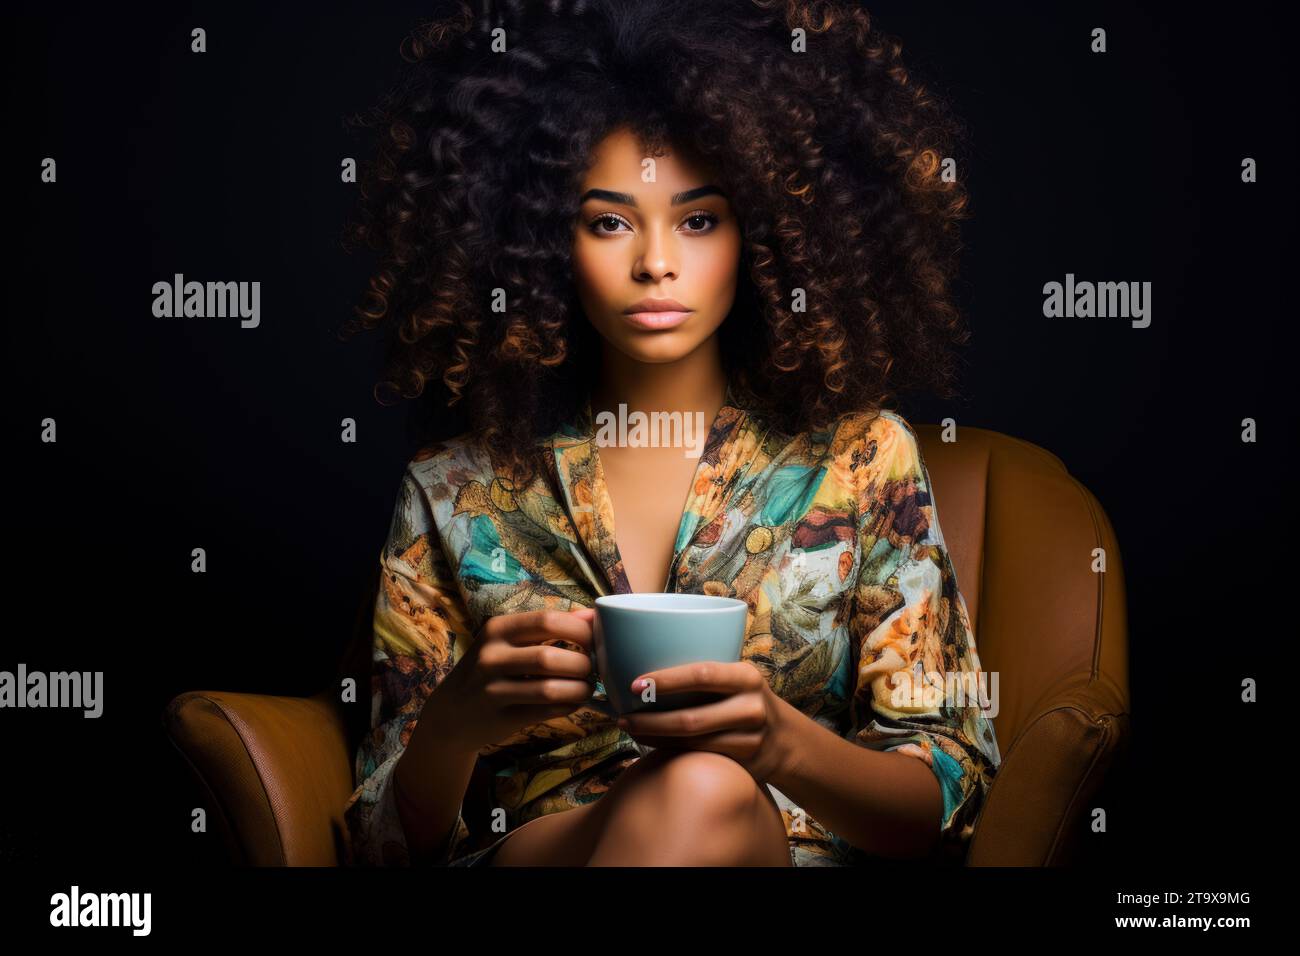 Handsome Dark-skinned Woman With Curly Hair Sitting In A Brown Leather Arm Chair And Holding A Cup In Her Hands Stock Photo